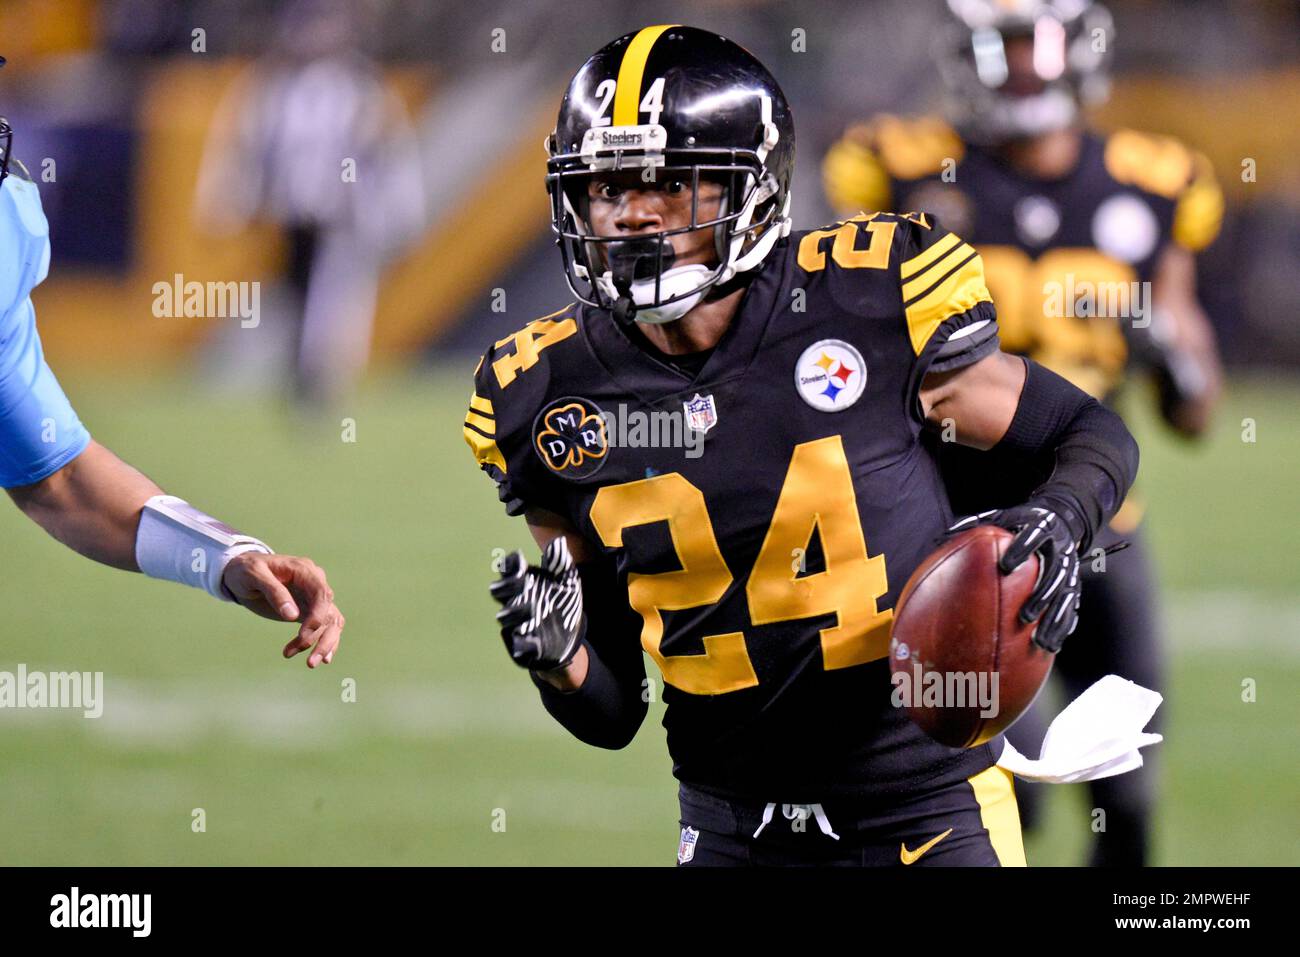 Pittsburgh Steelers defensive back Coty Sensabaugh (24) runs with